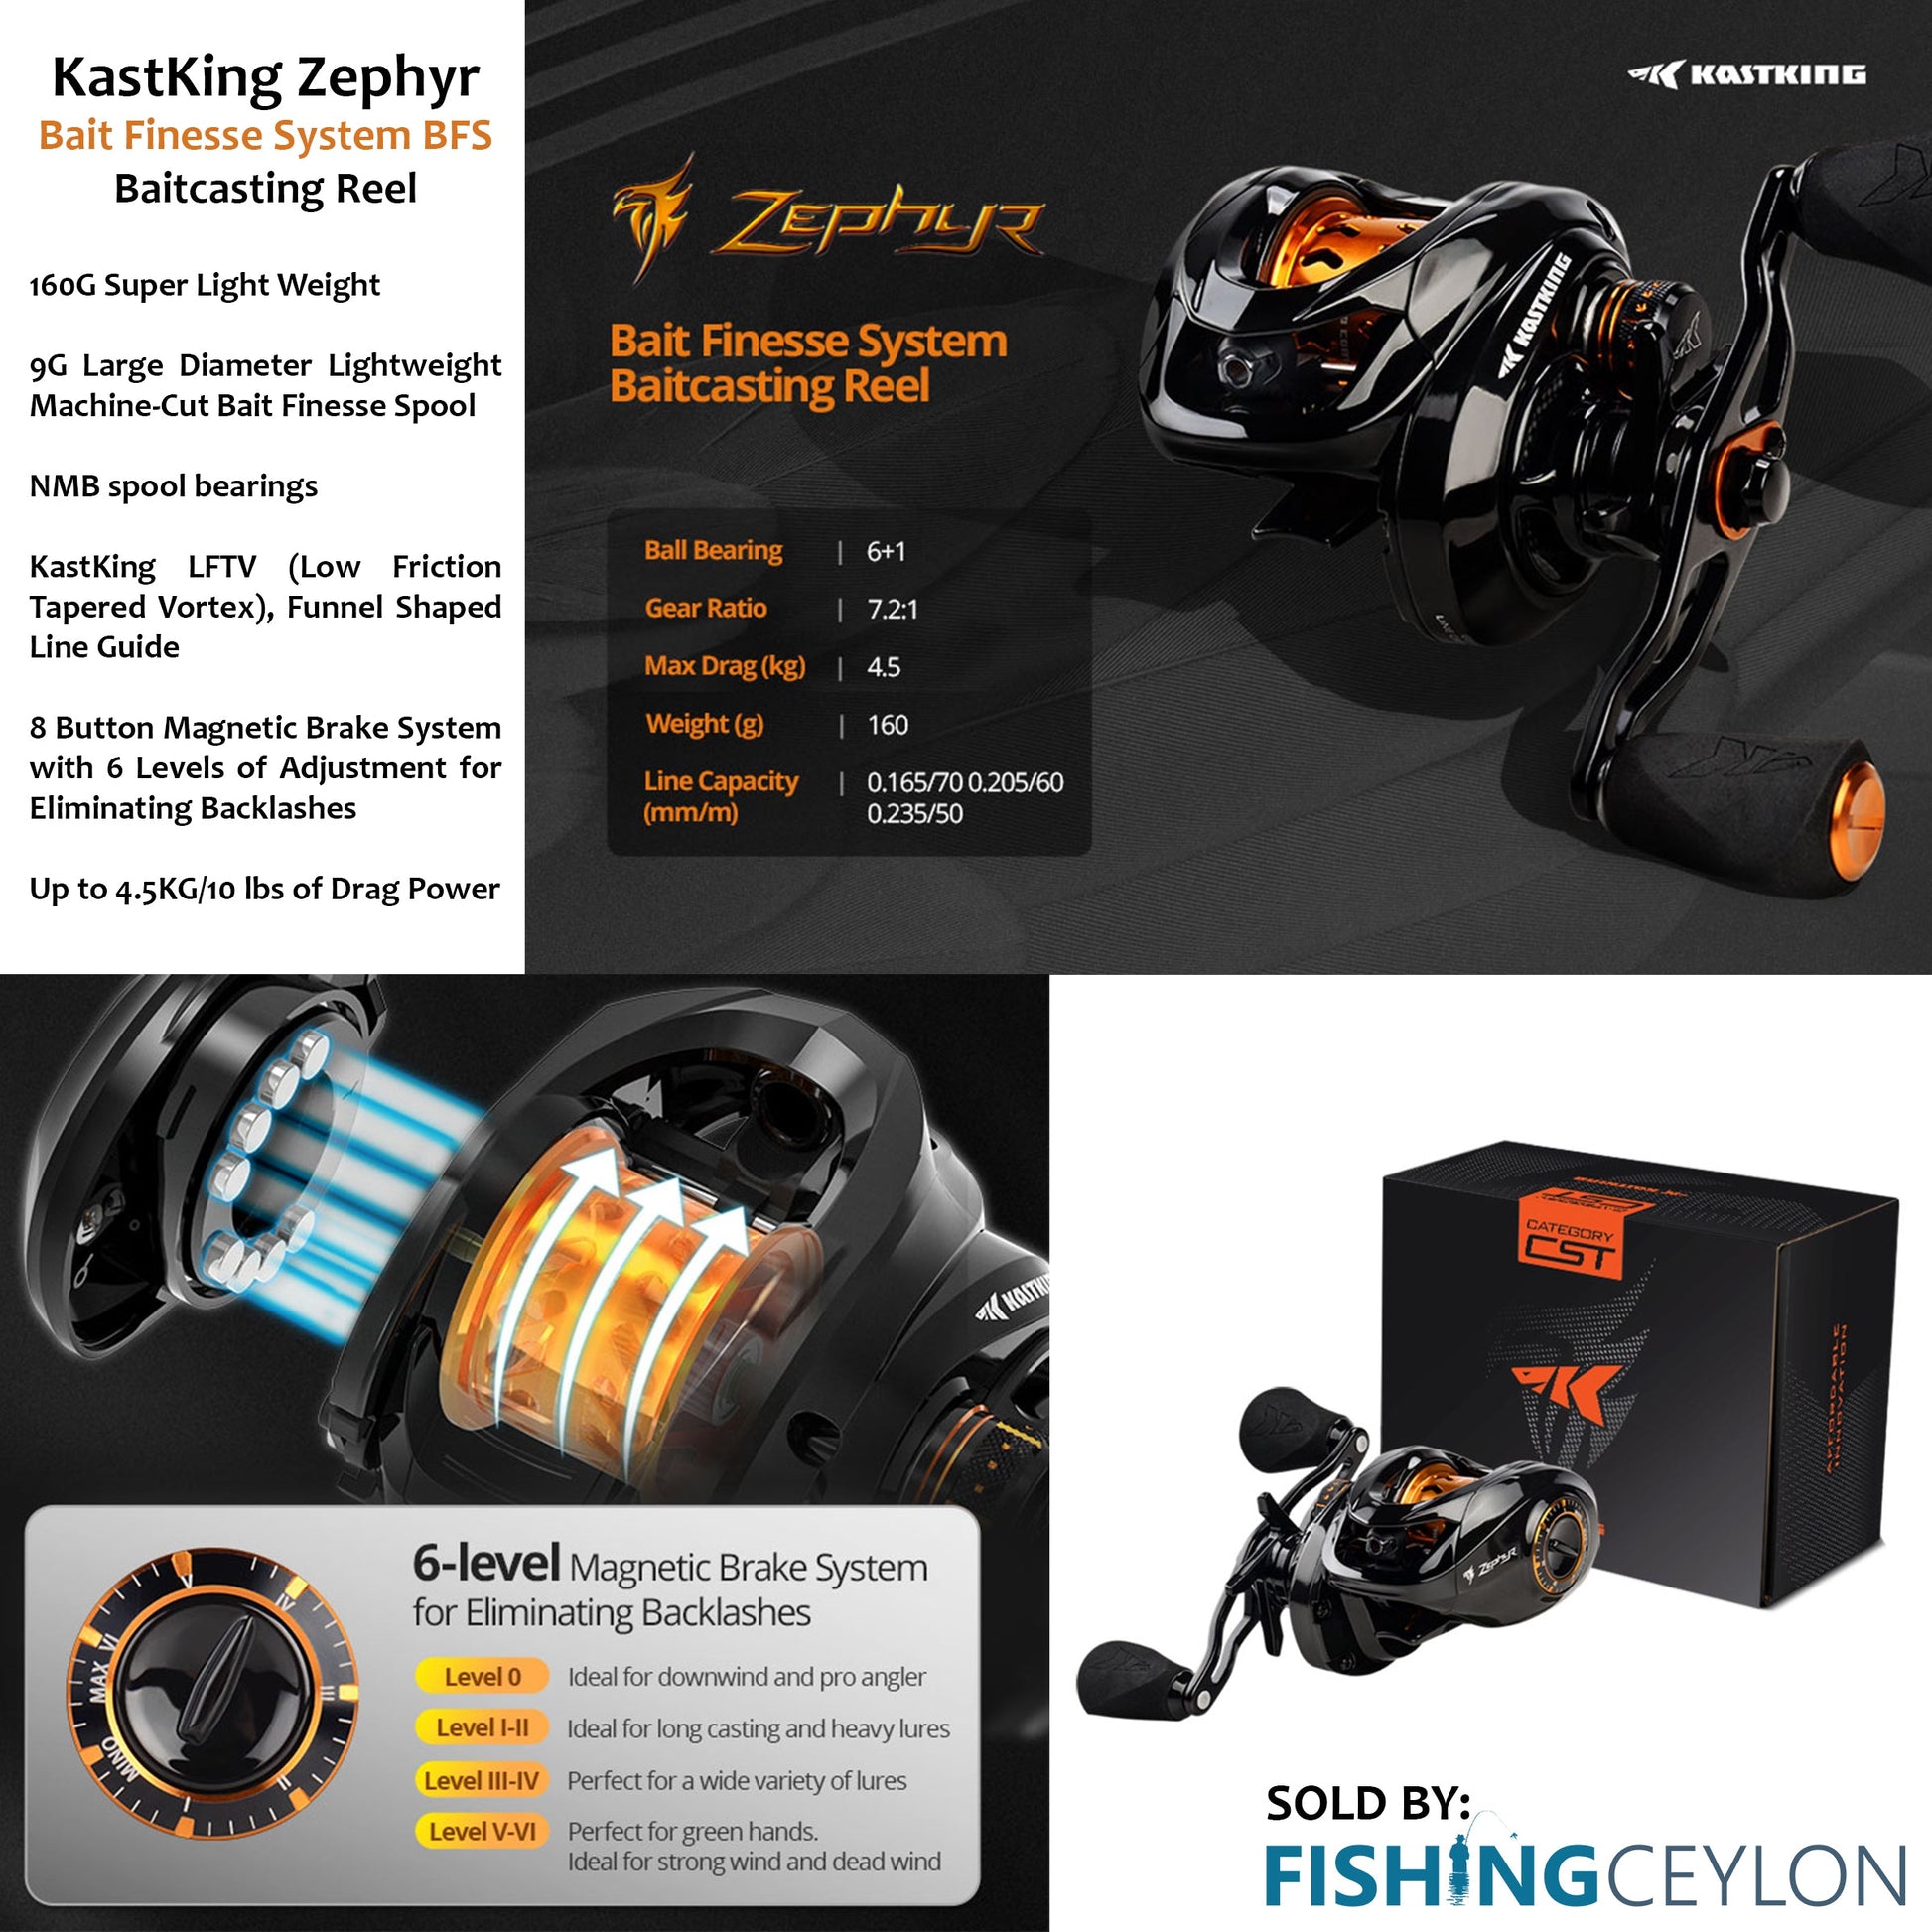 reelsonreels Featuring the new KastKing Zephyr BFS • • • Do you